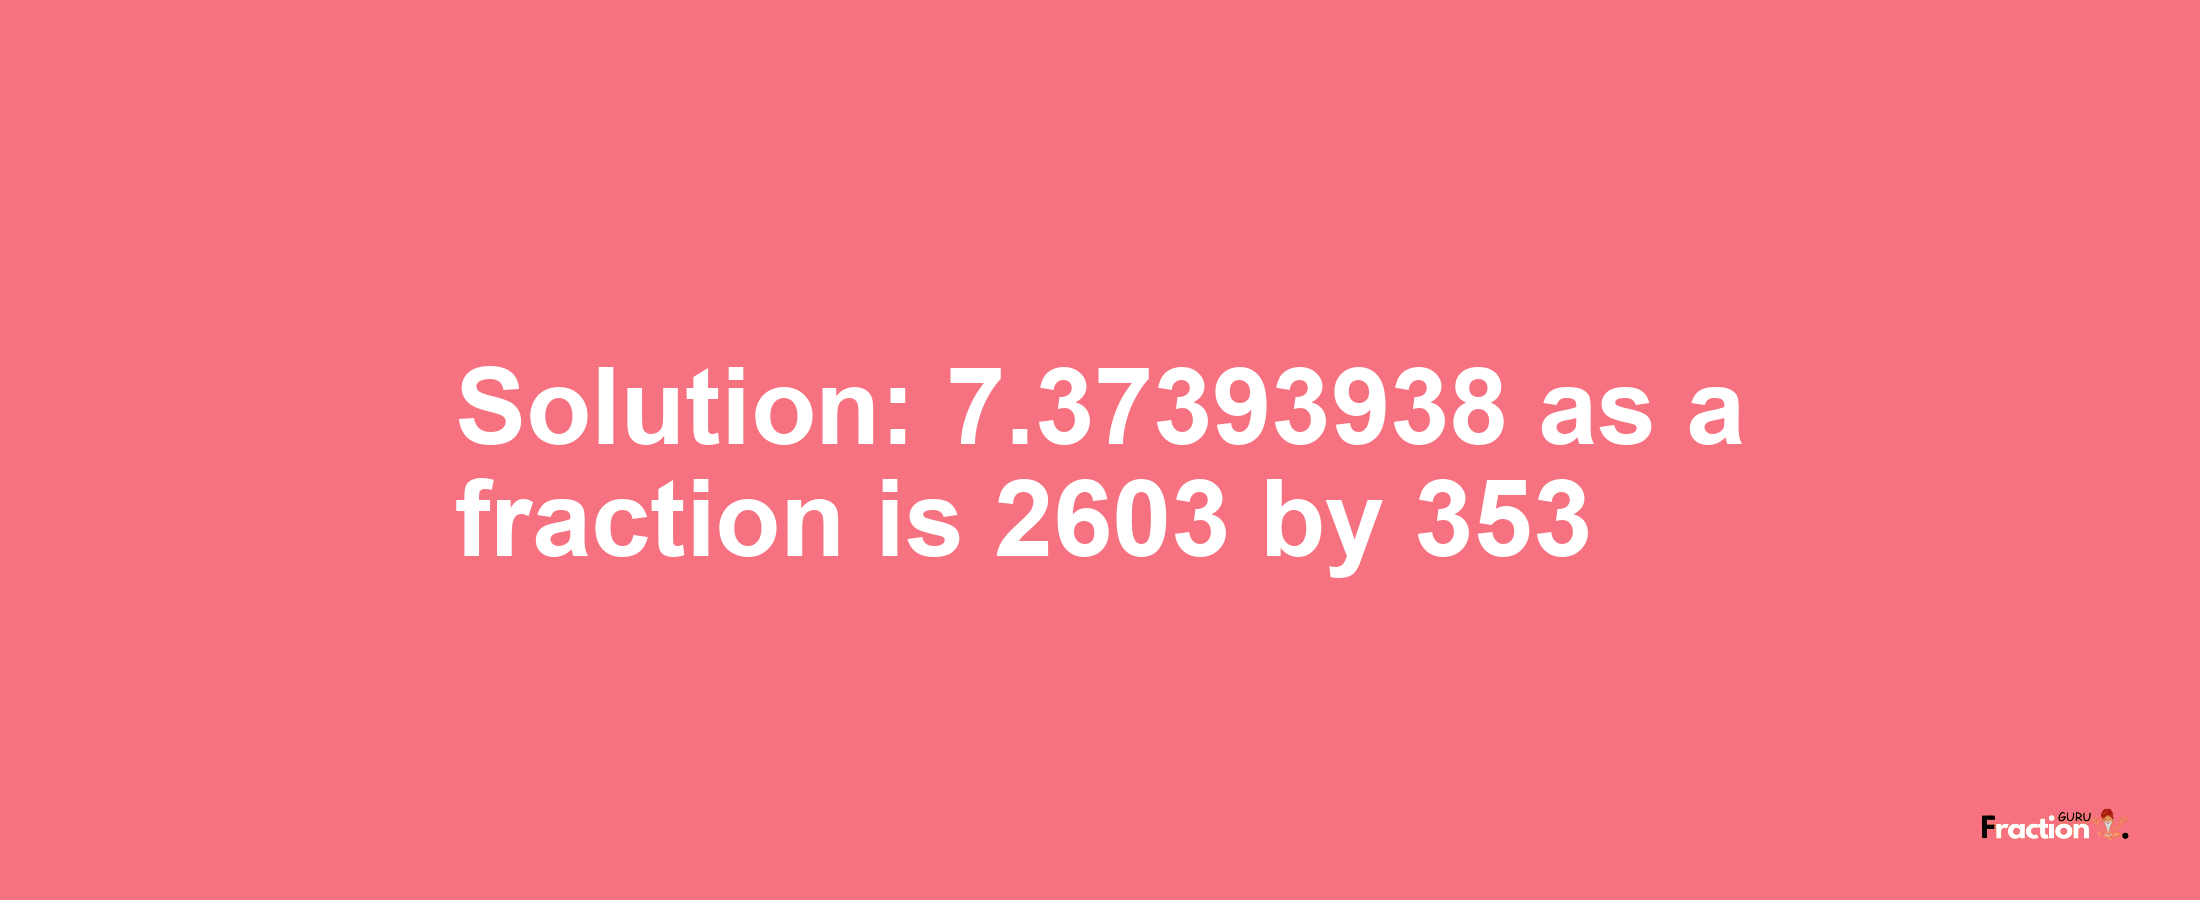 Solution:7.37393938 as a fraction is 2603/353